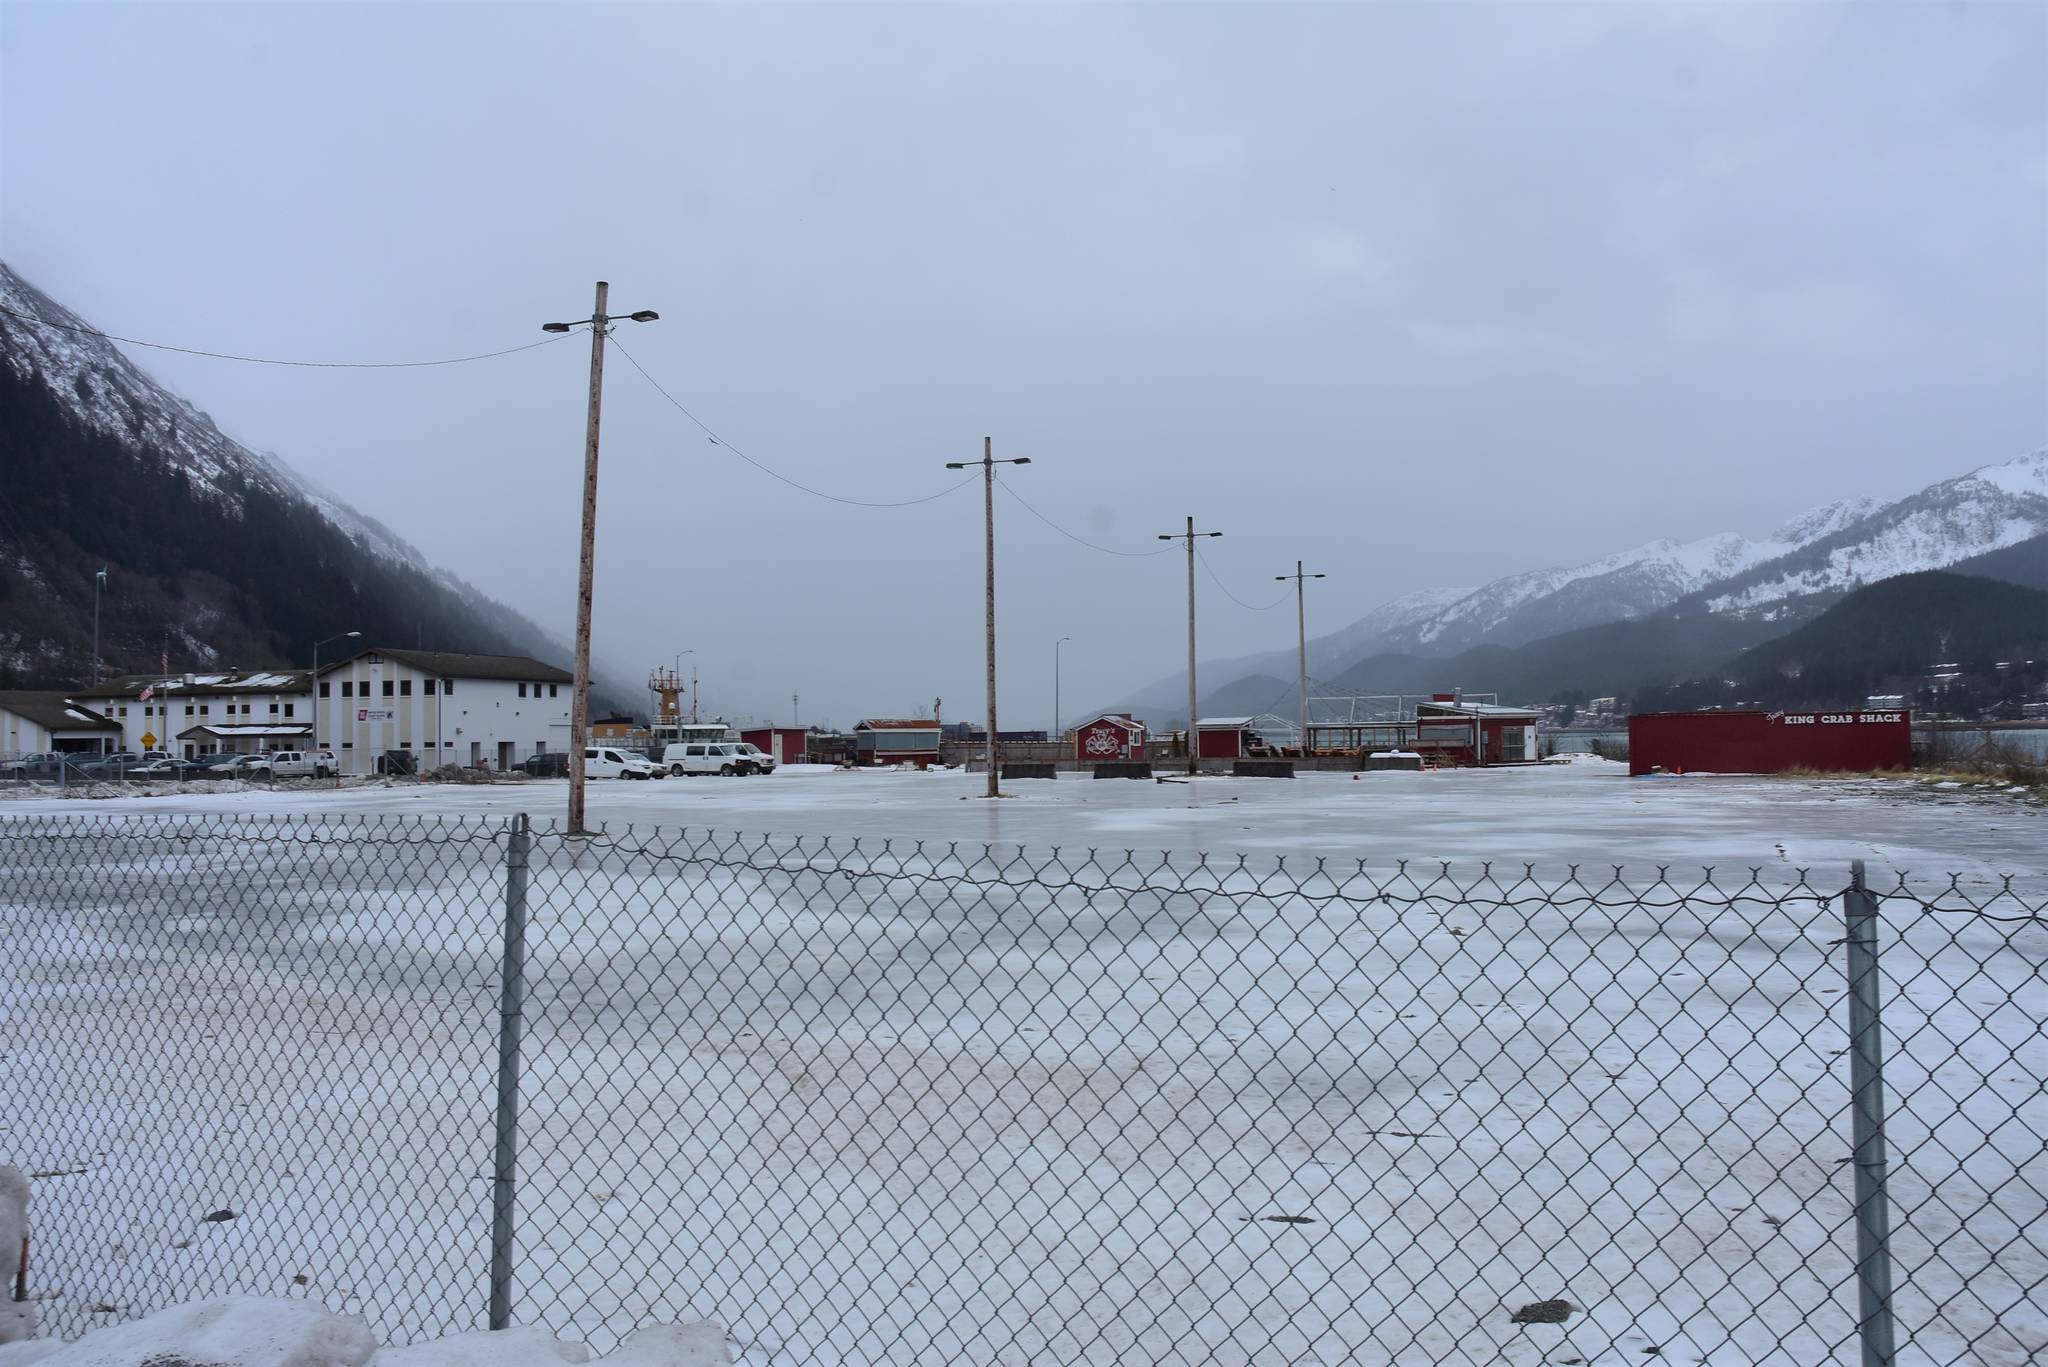 Norwegian Cruise Line’s property on Egan Drive was empty on Wednesday, Nov. 18, 2020. The company intends to build a dock and transform the property into a community asset and is seeking community input. (Peter Segall / Juneau Empire)